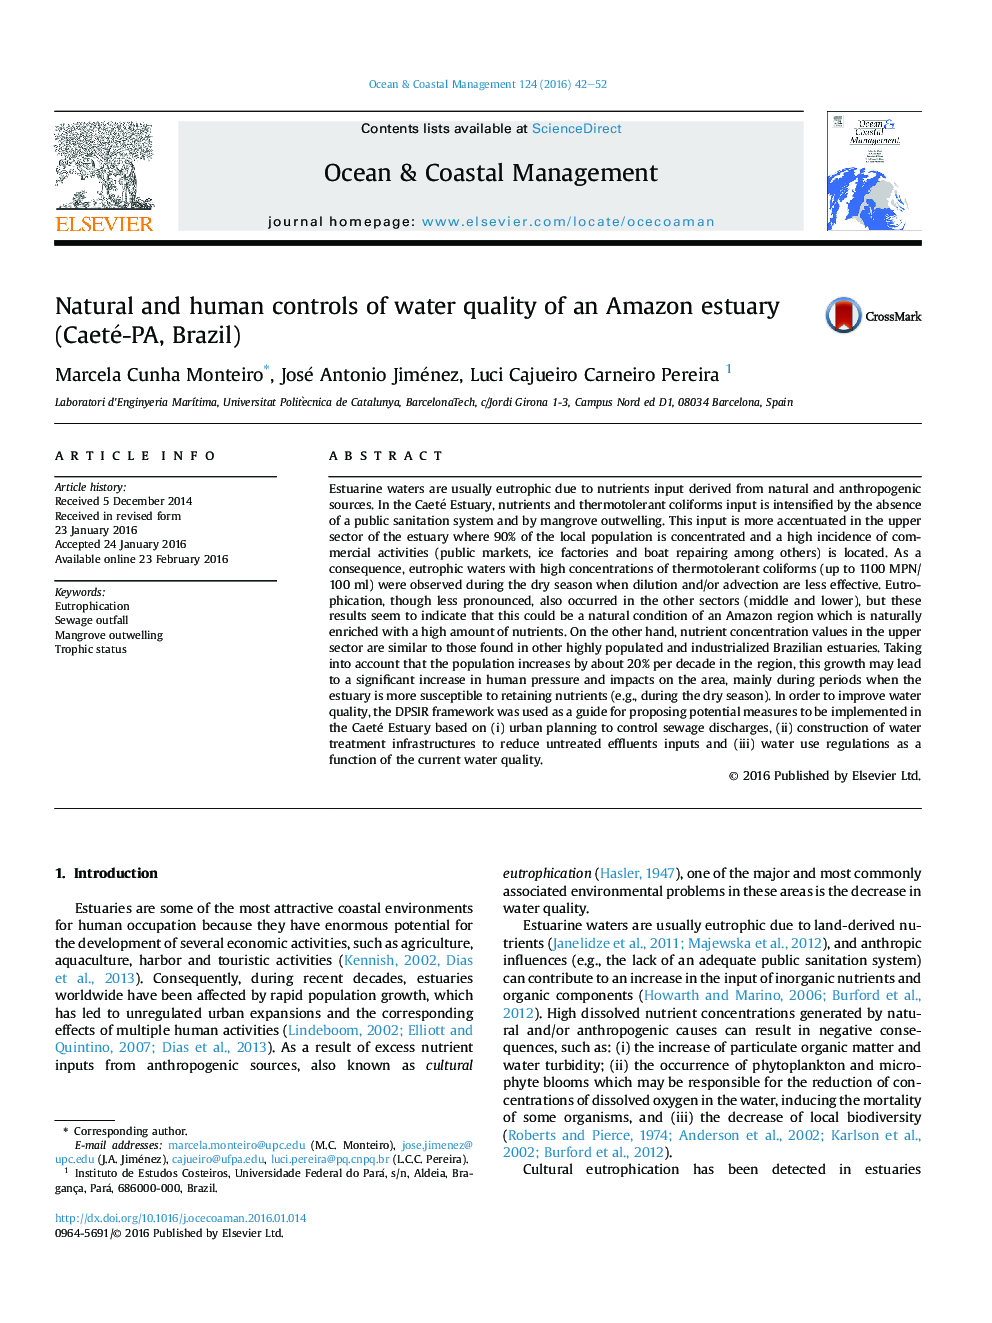 Natural and human controls of water quality of an Amazon estuary (Caeté-PA, Brazil)